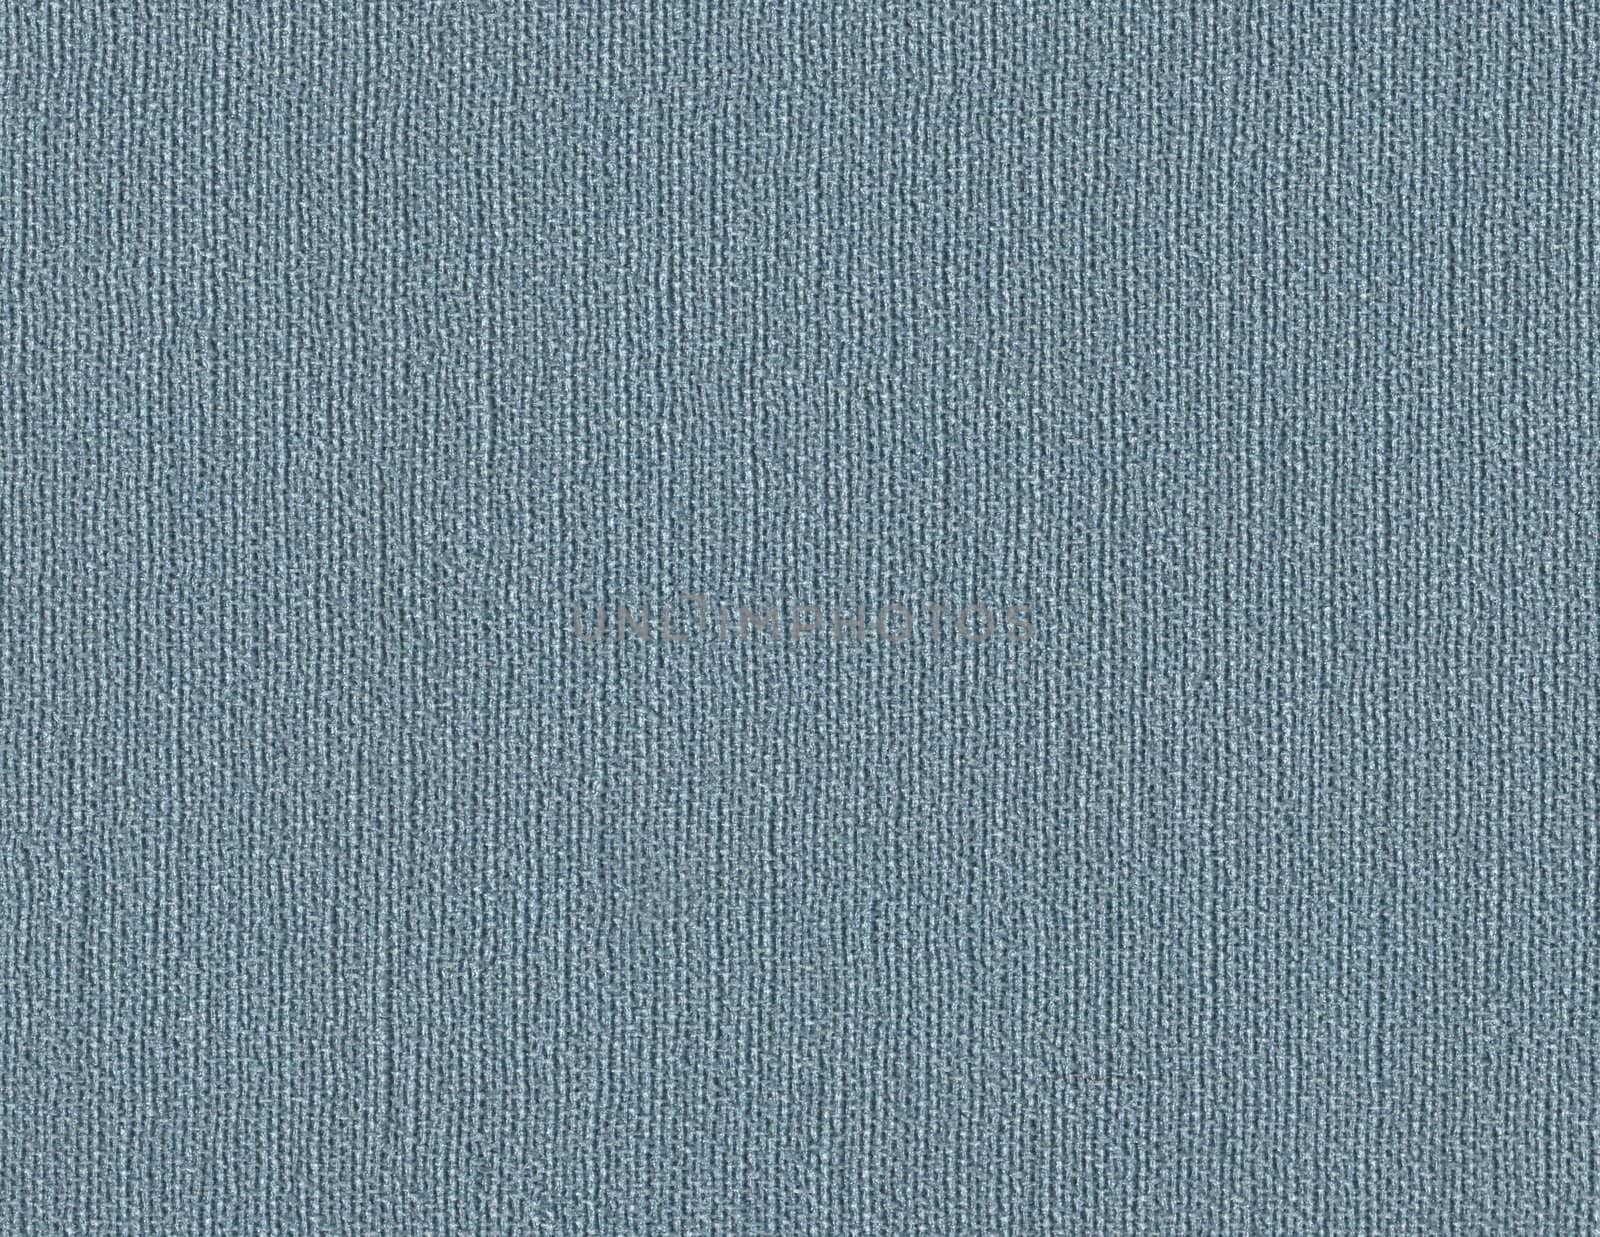 fabric texture (high res. scan)